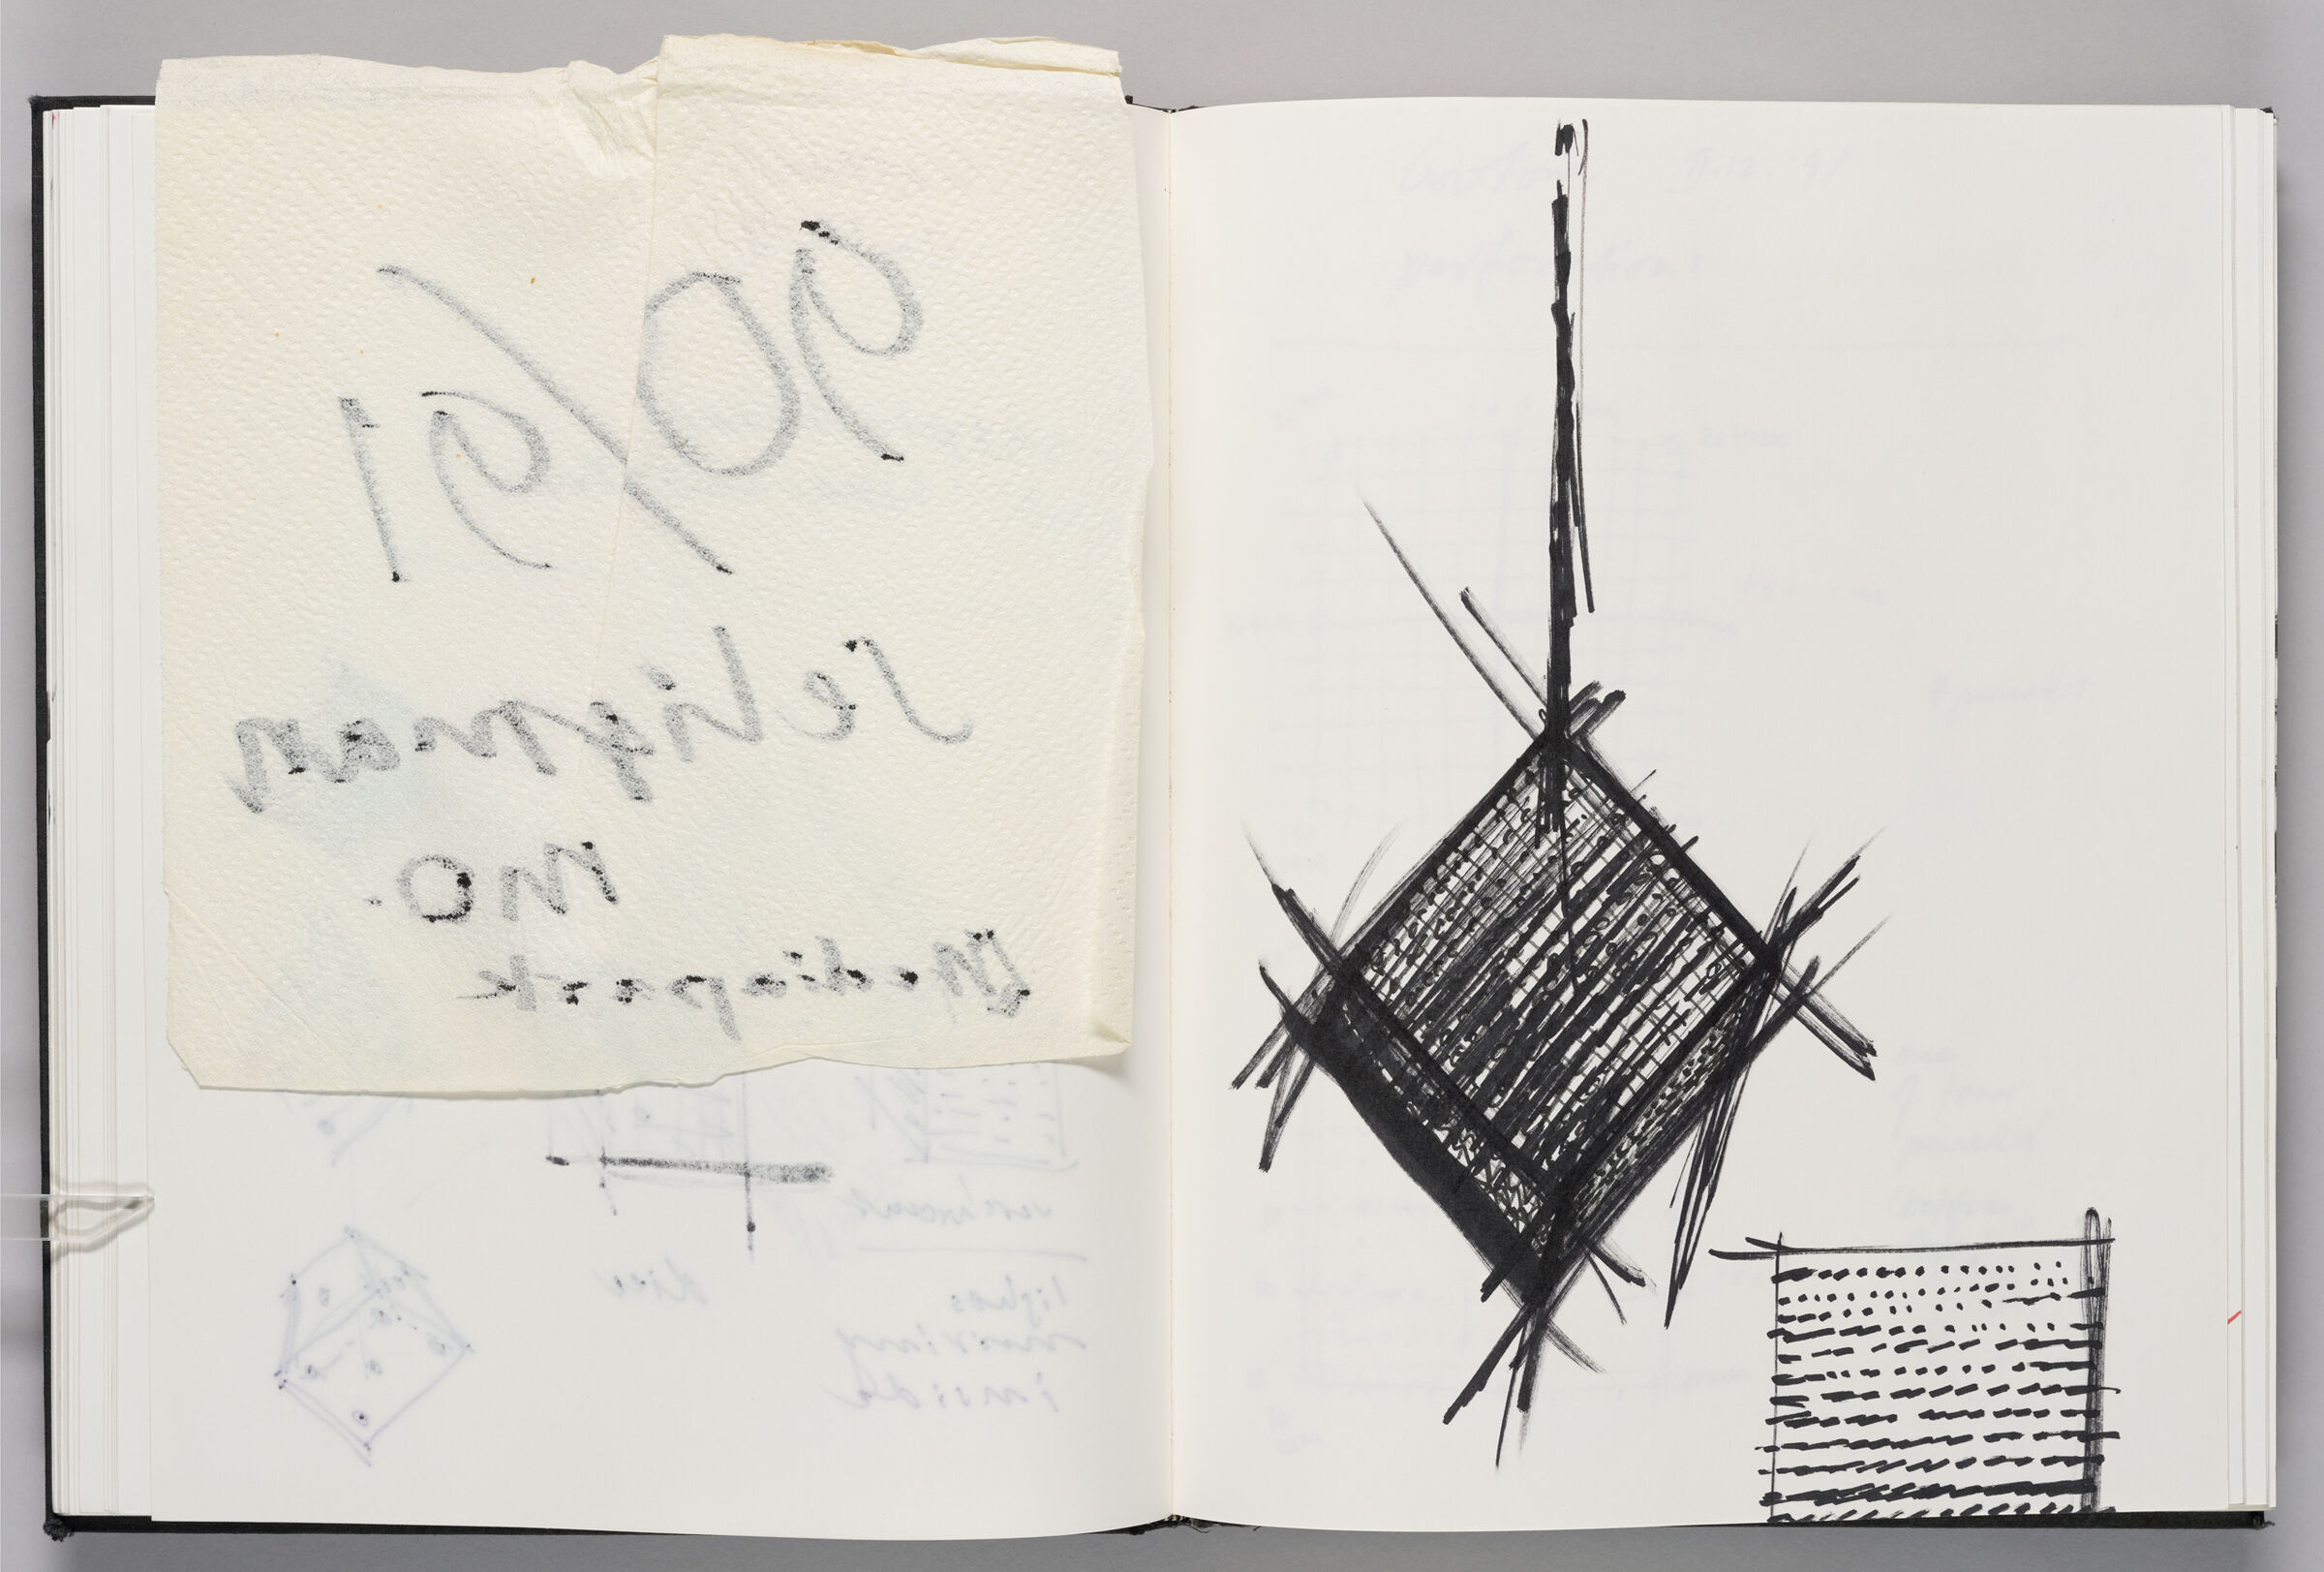 Untitled (Bleed-Through Of Previous Page, Left Page); Untitled (Designs For Light Sculptures, Right Page)